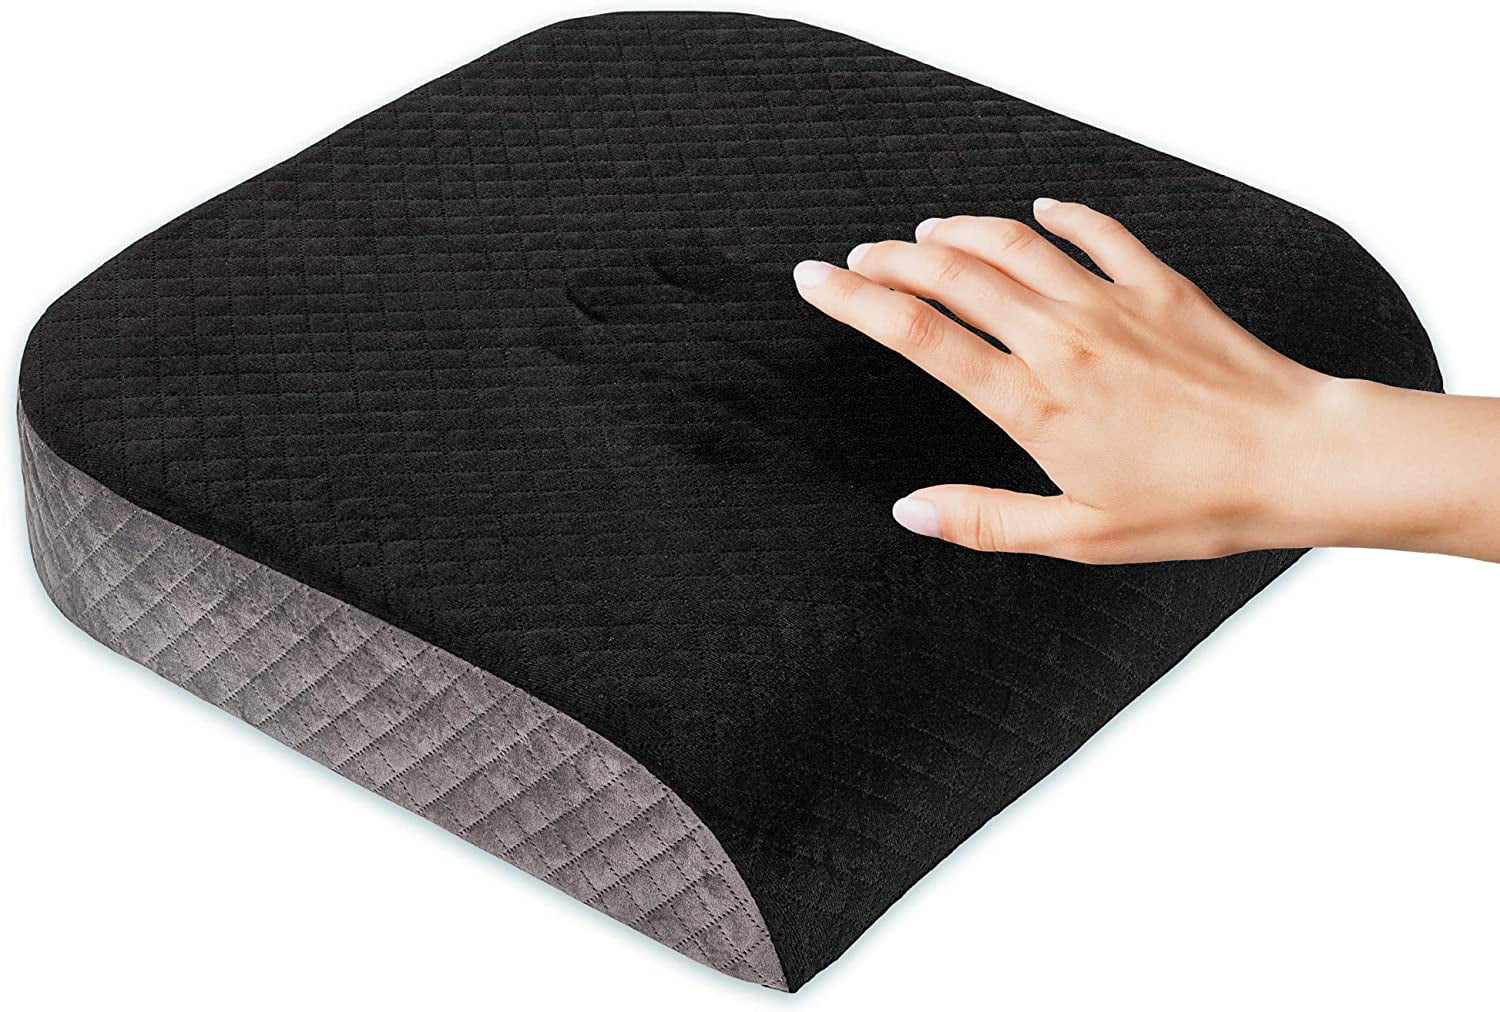 CARE APPAREL Extra Wide Seat Cushion - Foam Cushion 5 Inch Thick Adult  Booster Seat Elevation Pillow with Washable Slip-on Cover - Portable Pain